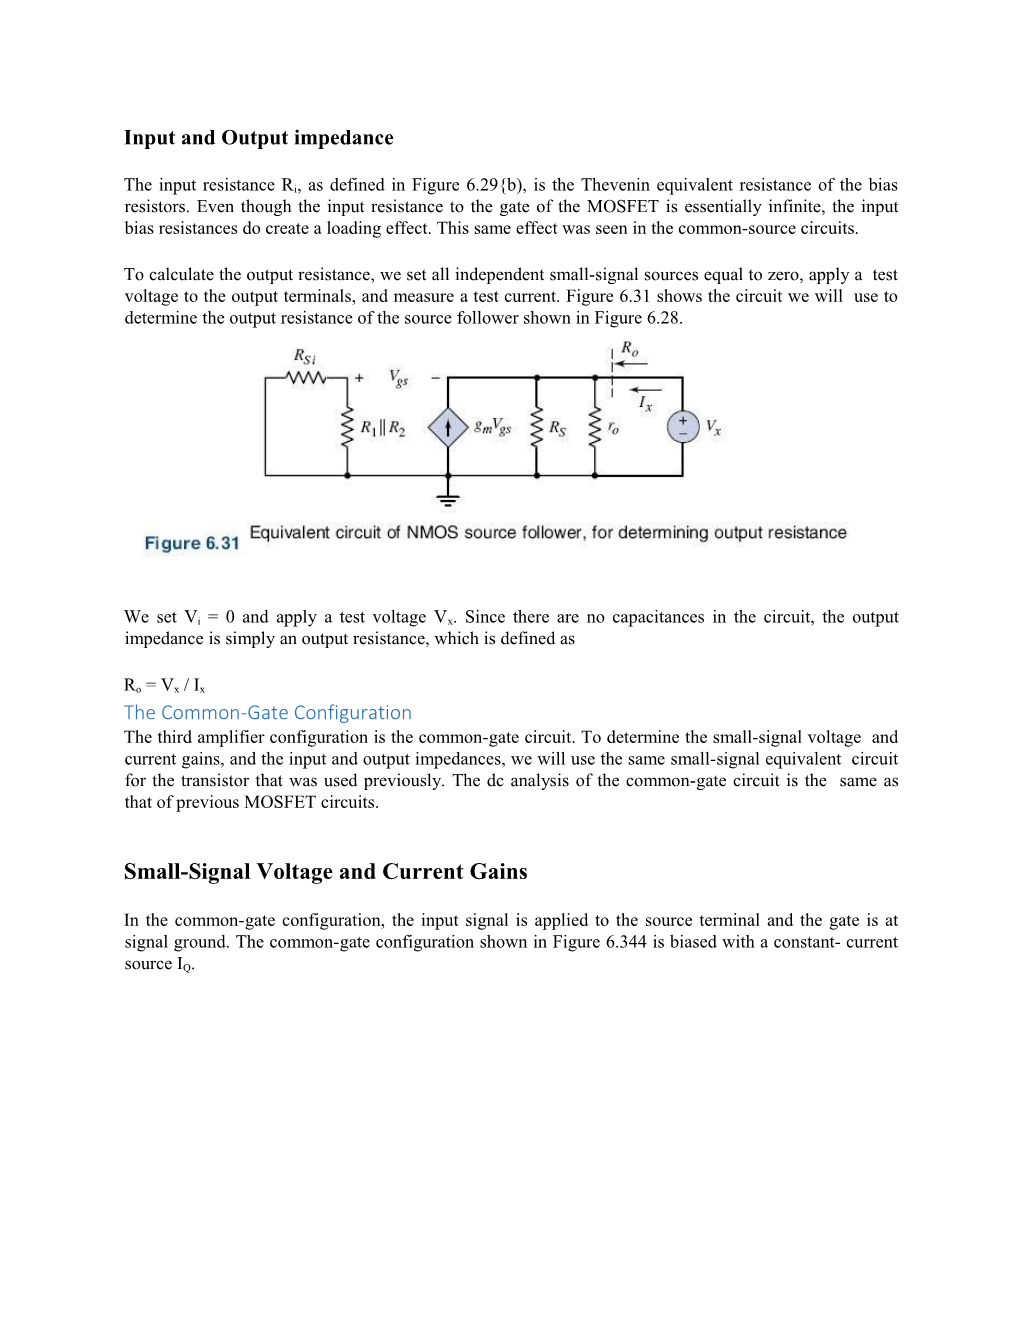 Input and Output Impedance